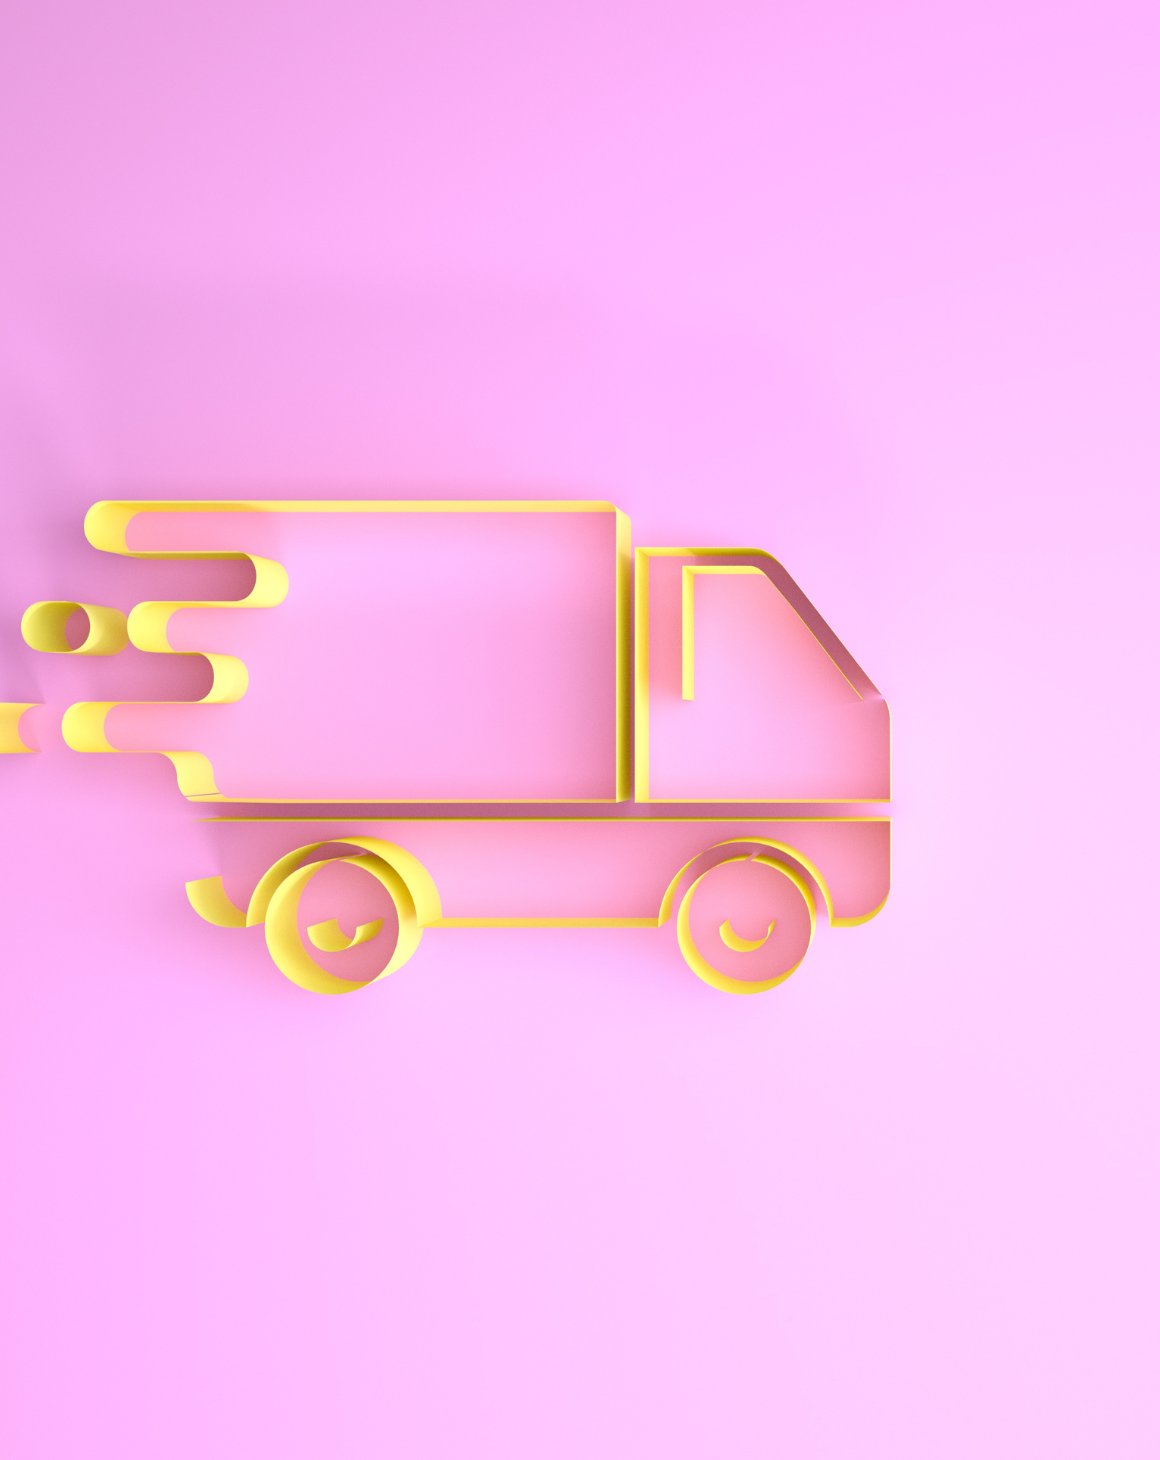 truck-image-on-pink-background